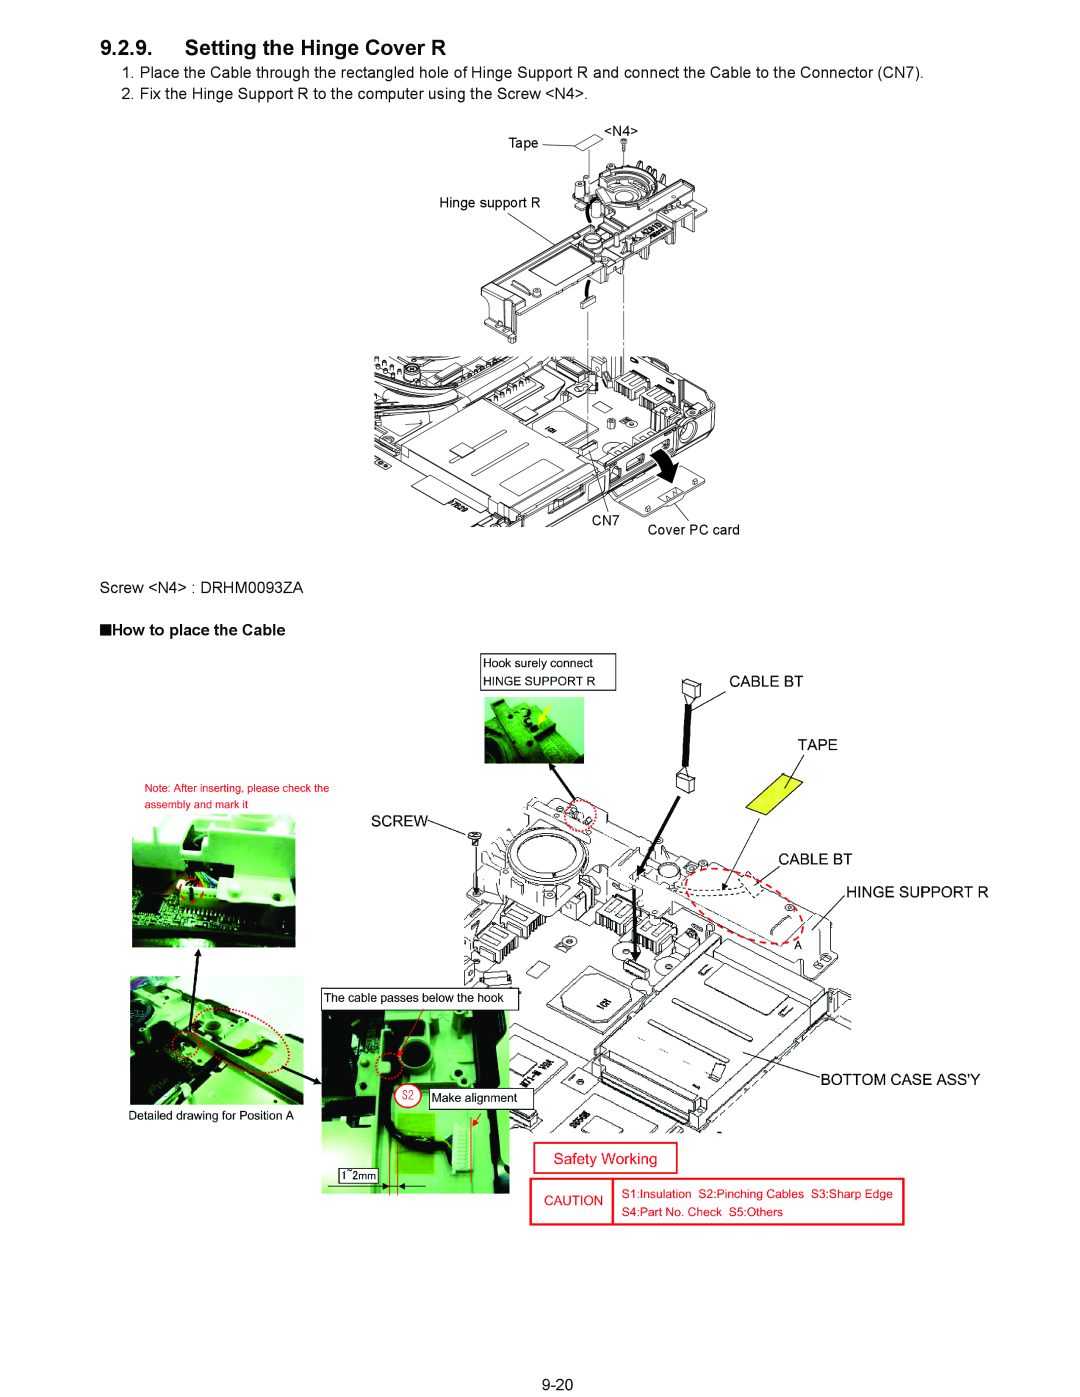 Panasonic CF-52EKM 1 D 2 M service manual Setting the Hinge Cover R, How to place the Cable 